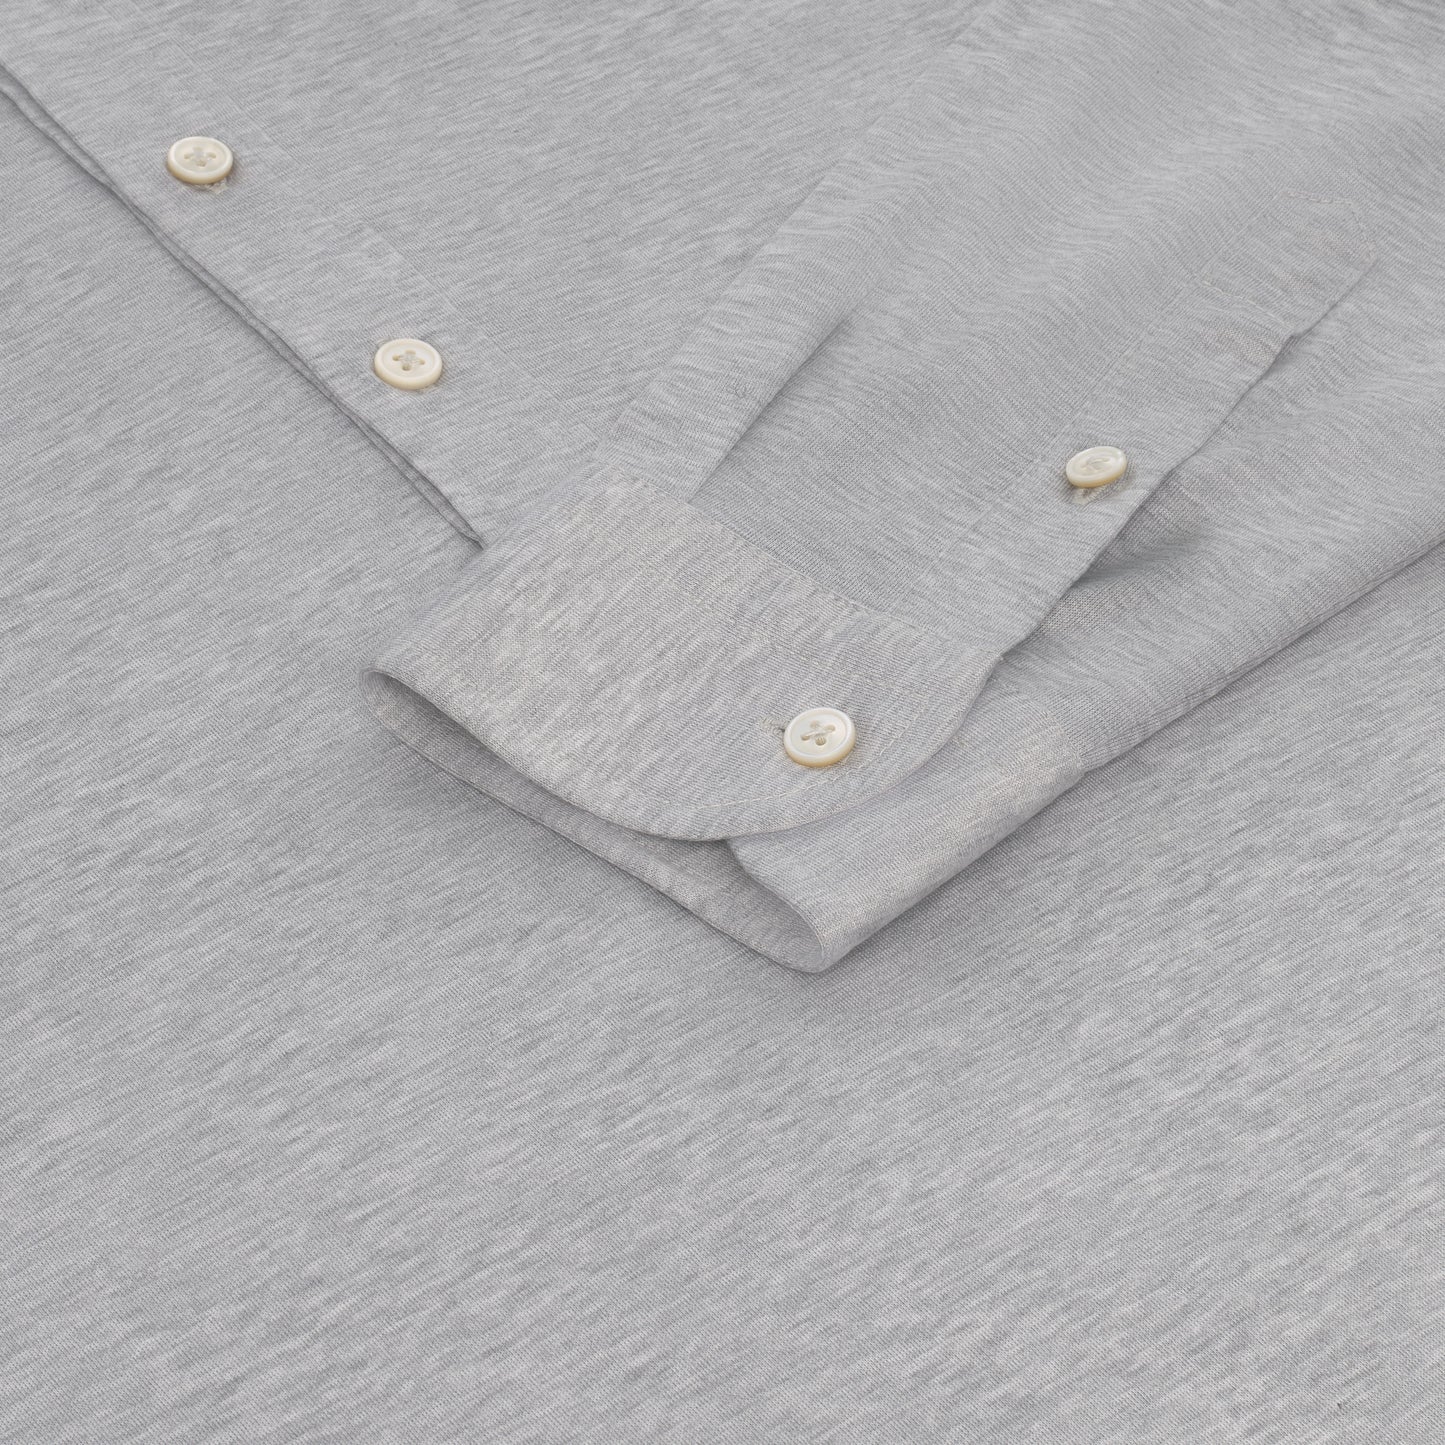 Cotton Polo Shirt in Grey Melange with Long Placket